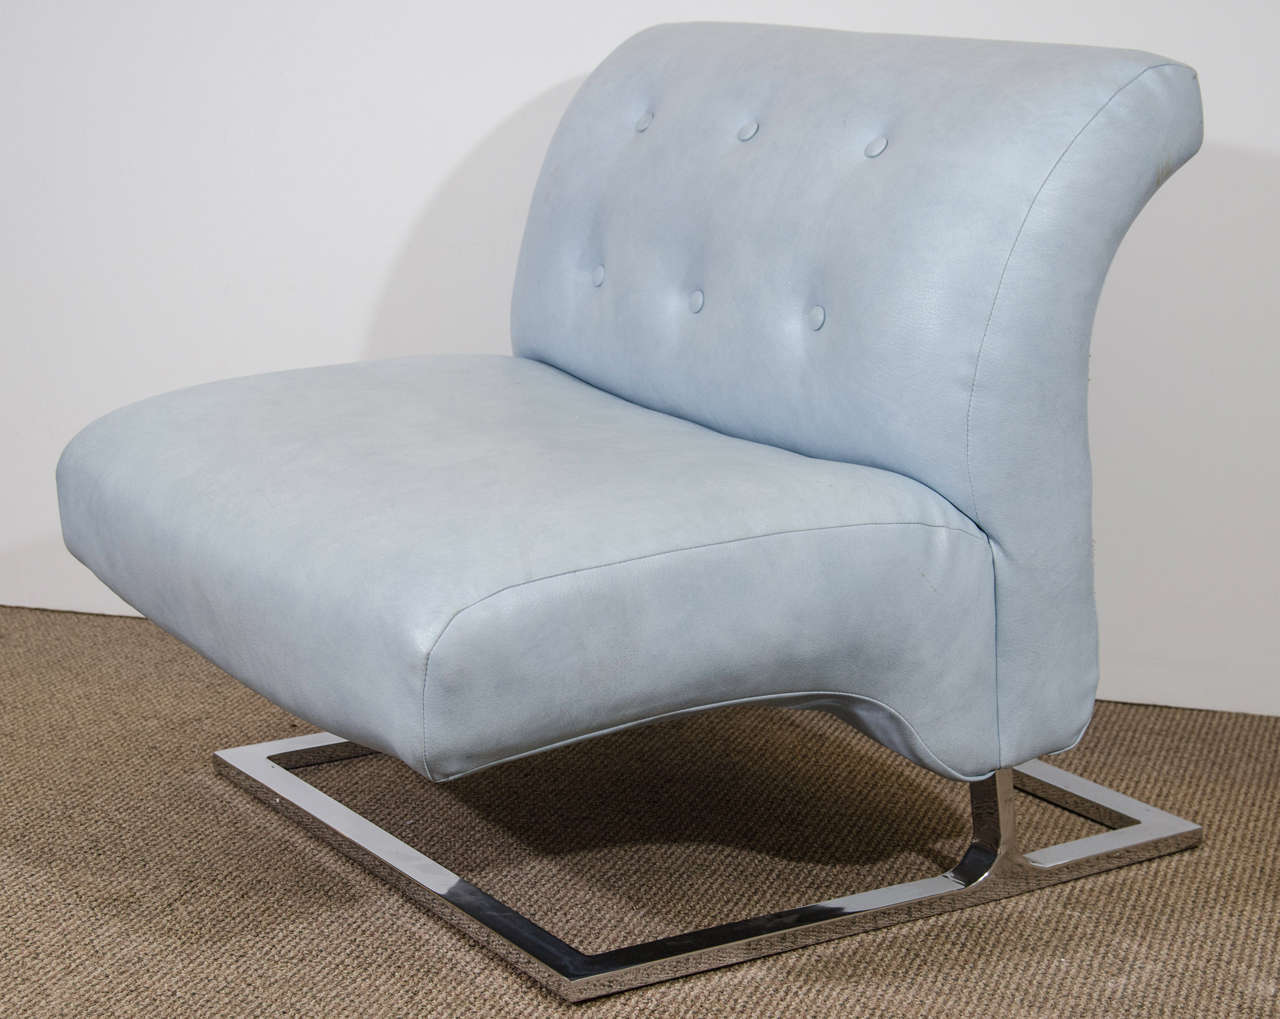 A vintage powder blue lounge slipper chair by Thayer Coggin, upholstered in naugahyde on a curved chrome base. Good overall condition, any wear consistent with age and use.